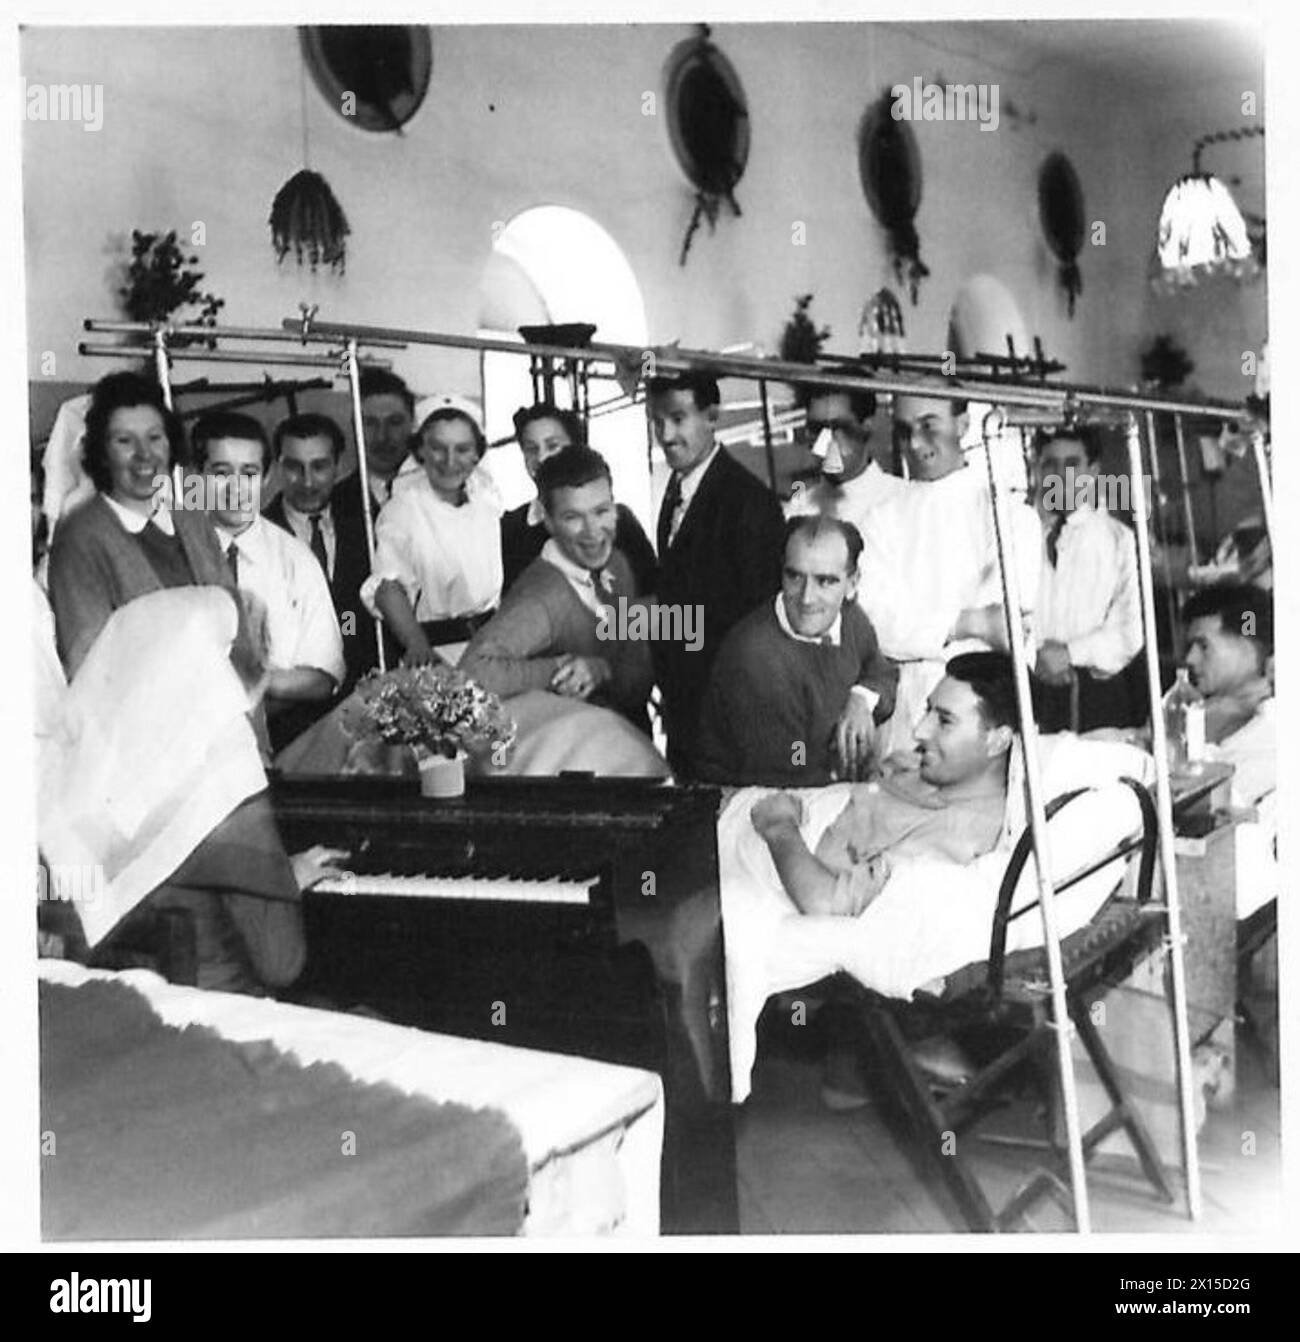 CHRISTMAS AT 104 BRITISH GENERAL HOSPITAL : OBSERVER STORY - Ward singing - left to right:- Nursing Officer M. Hawkins of Acomb, Hexham, Northumberland (seated at piano back to camera) Nursing Officer A. Ramage of Fforestfach, Swansea Pte. J. Johnstone of 12 Dewsbury Place, Longsight, Manchester VAD Iseult Passy of St.Anta, Carris Bay, Cornwall L/Cpl. F. Mayo of 20 Newhall Street, Walsall, Staffs Mountaineer T. Summers of Campbell, 183 Bolton Street, Glasgow, C.4. Pte. N. Webster of 85 Greaves Street, Little Hordon, Bradford, Yorks British Army Stock Photo